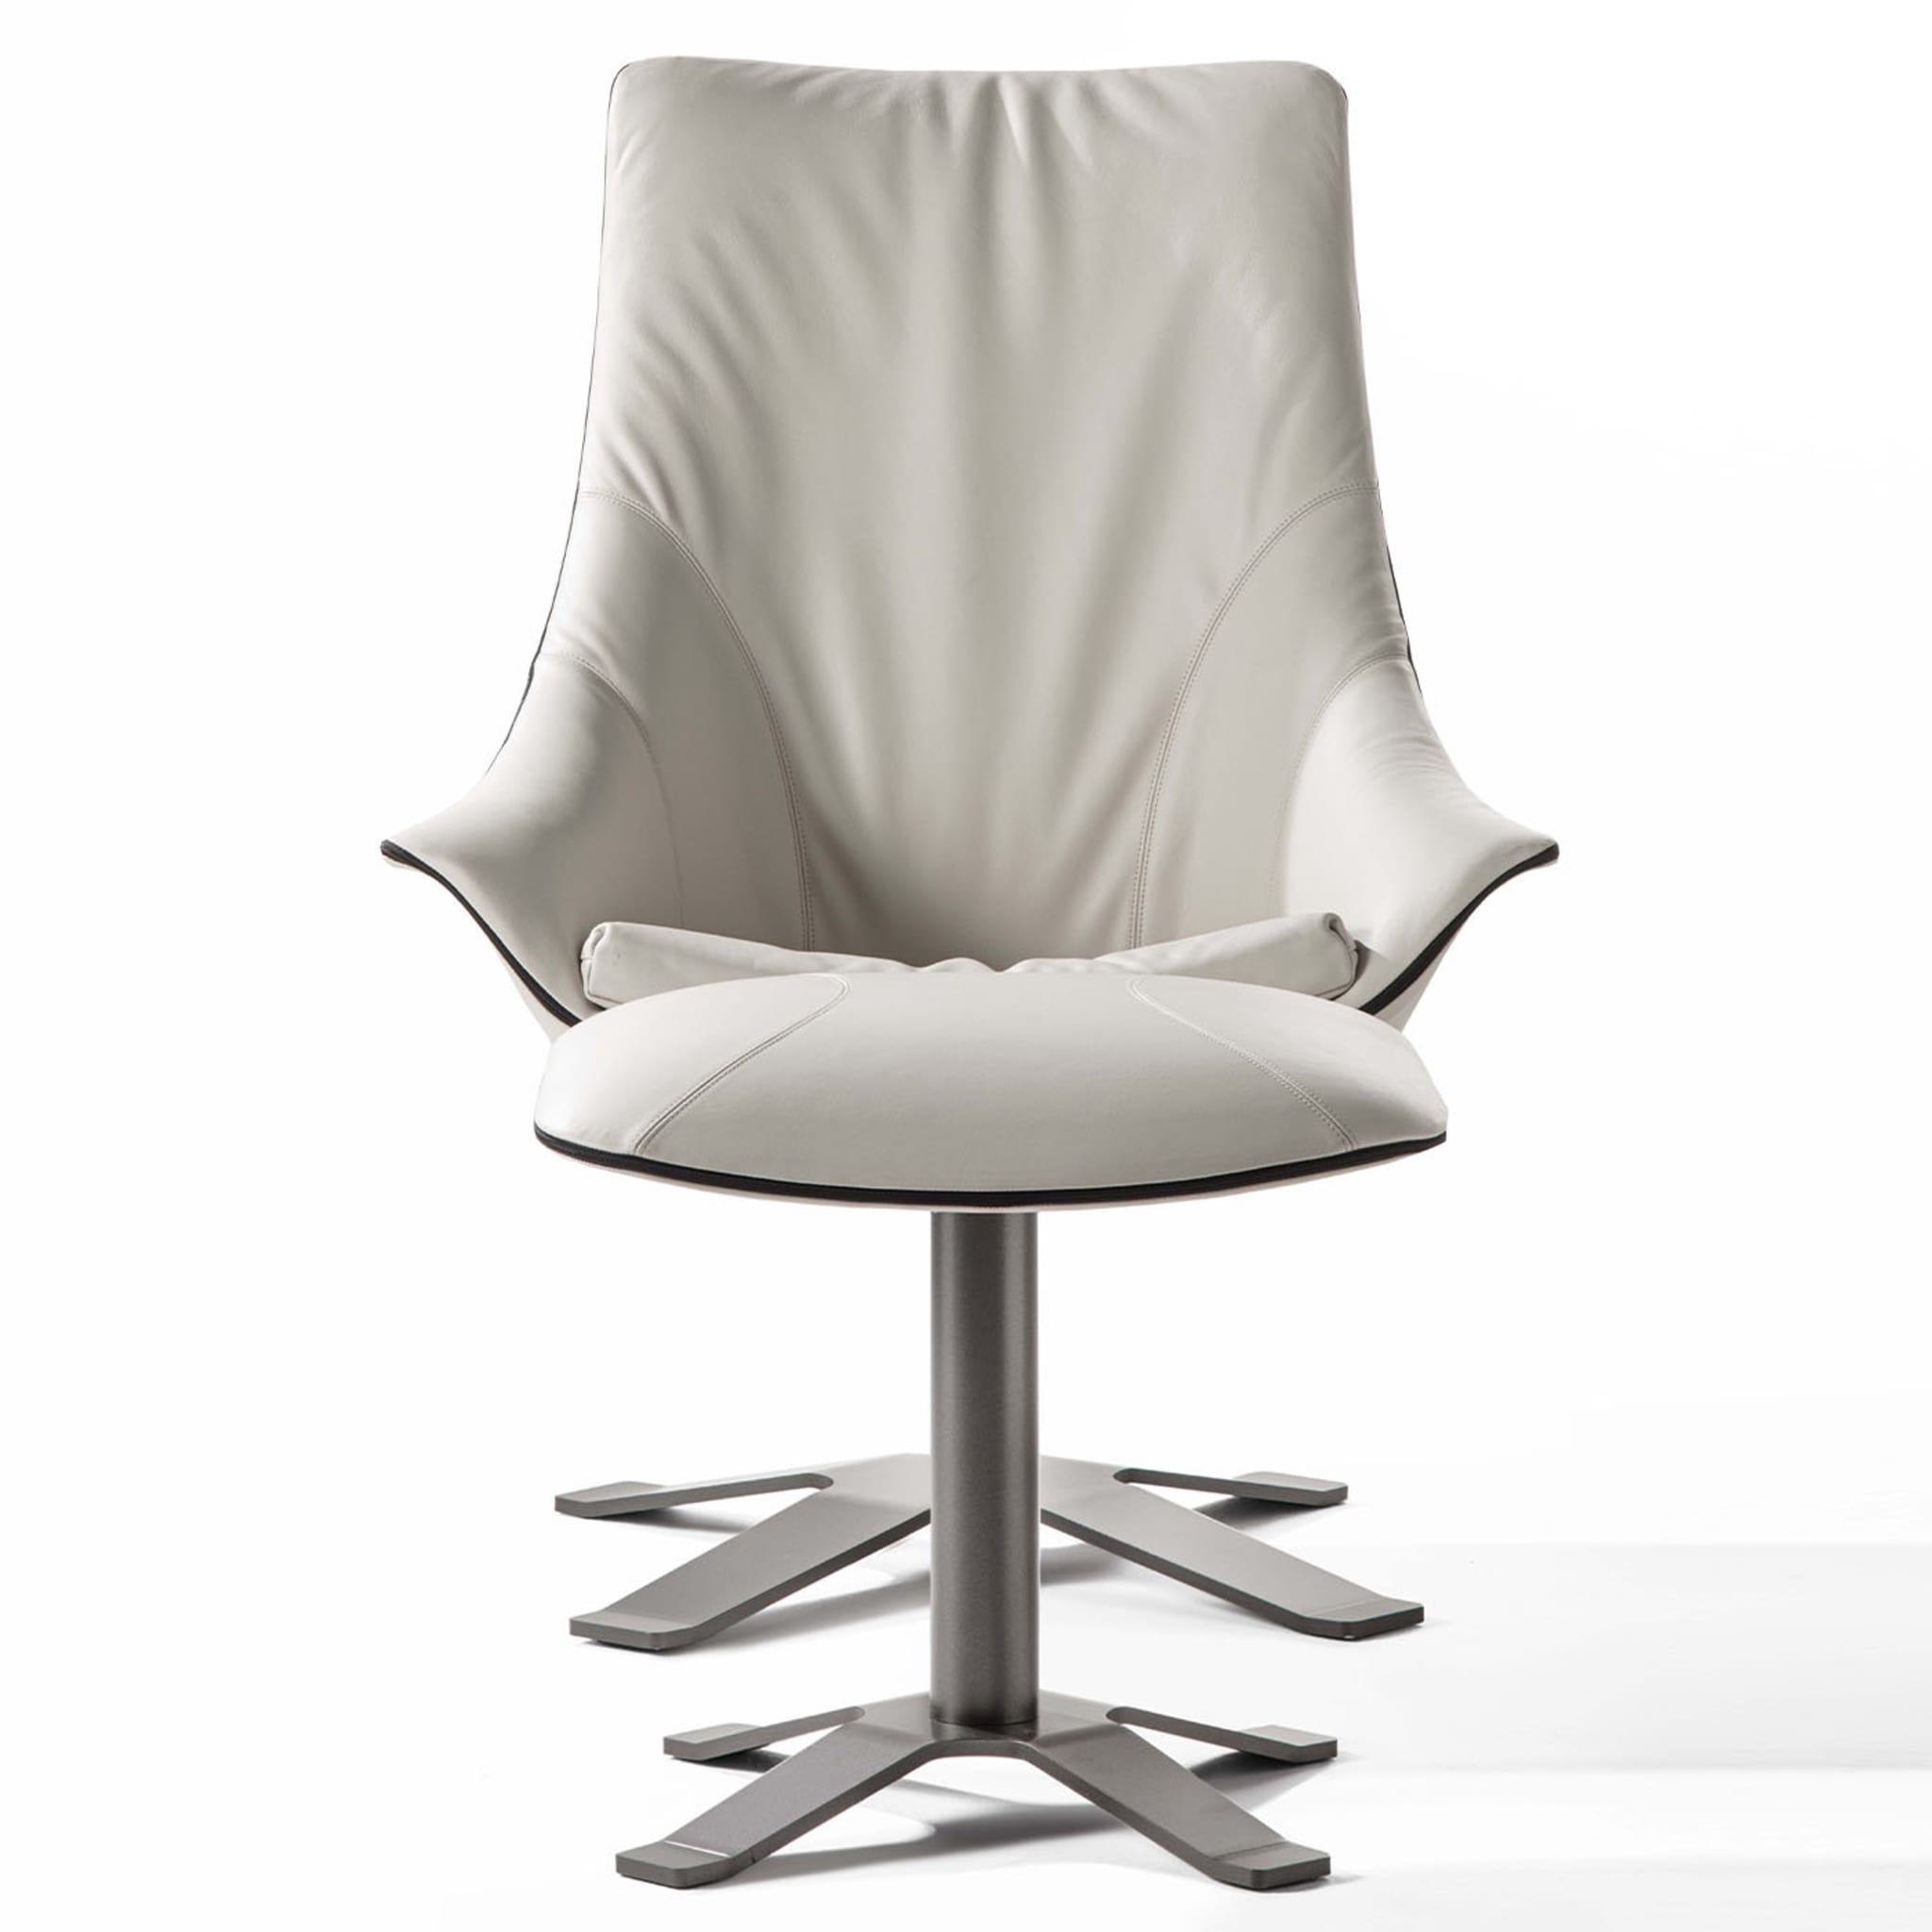 Lullaby White Armchair - Alternative view 5